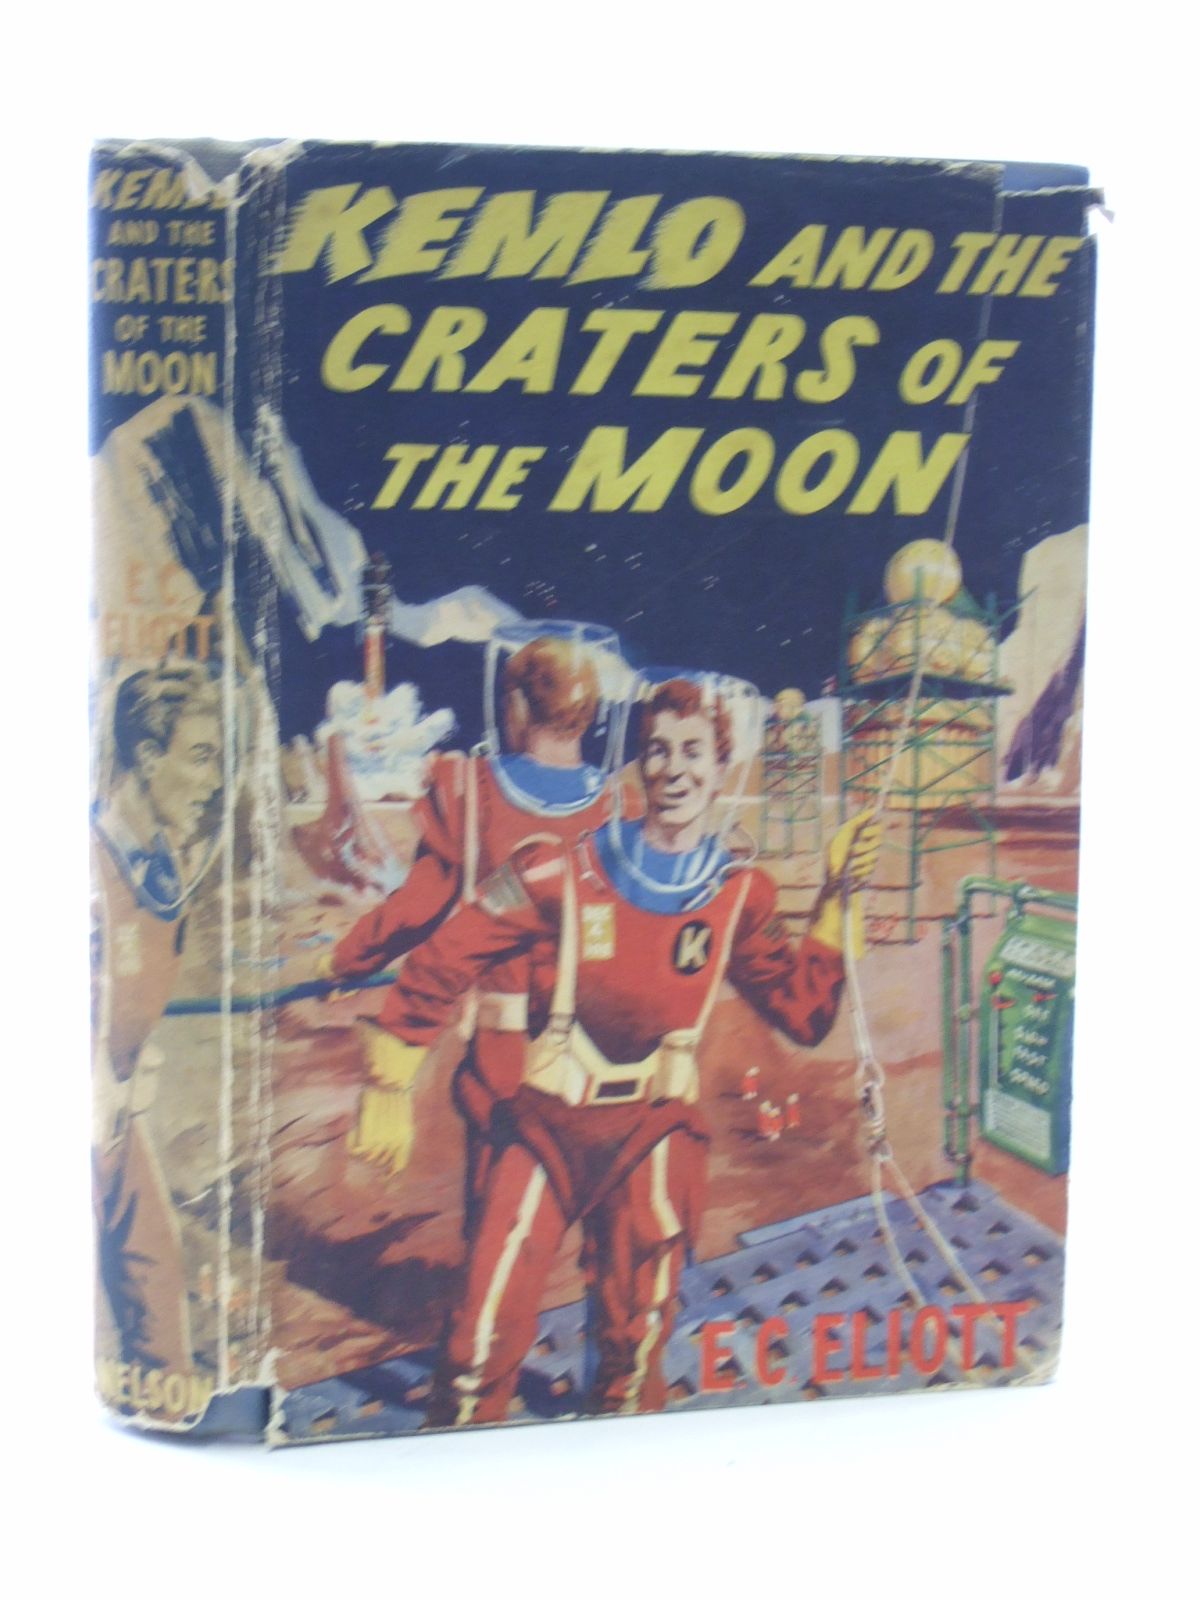 Cover of KEMLO AND THE CRATERS OF THE MOON by E.C. Eliott